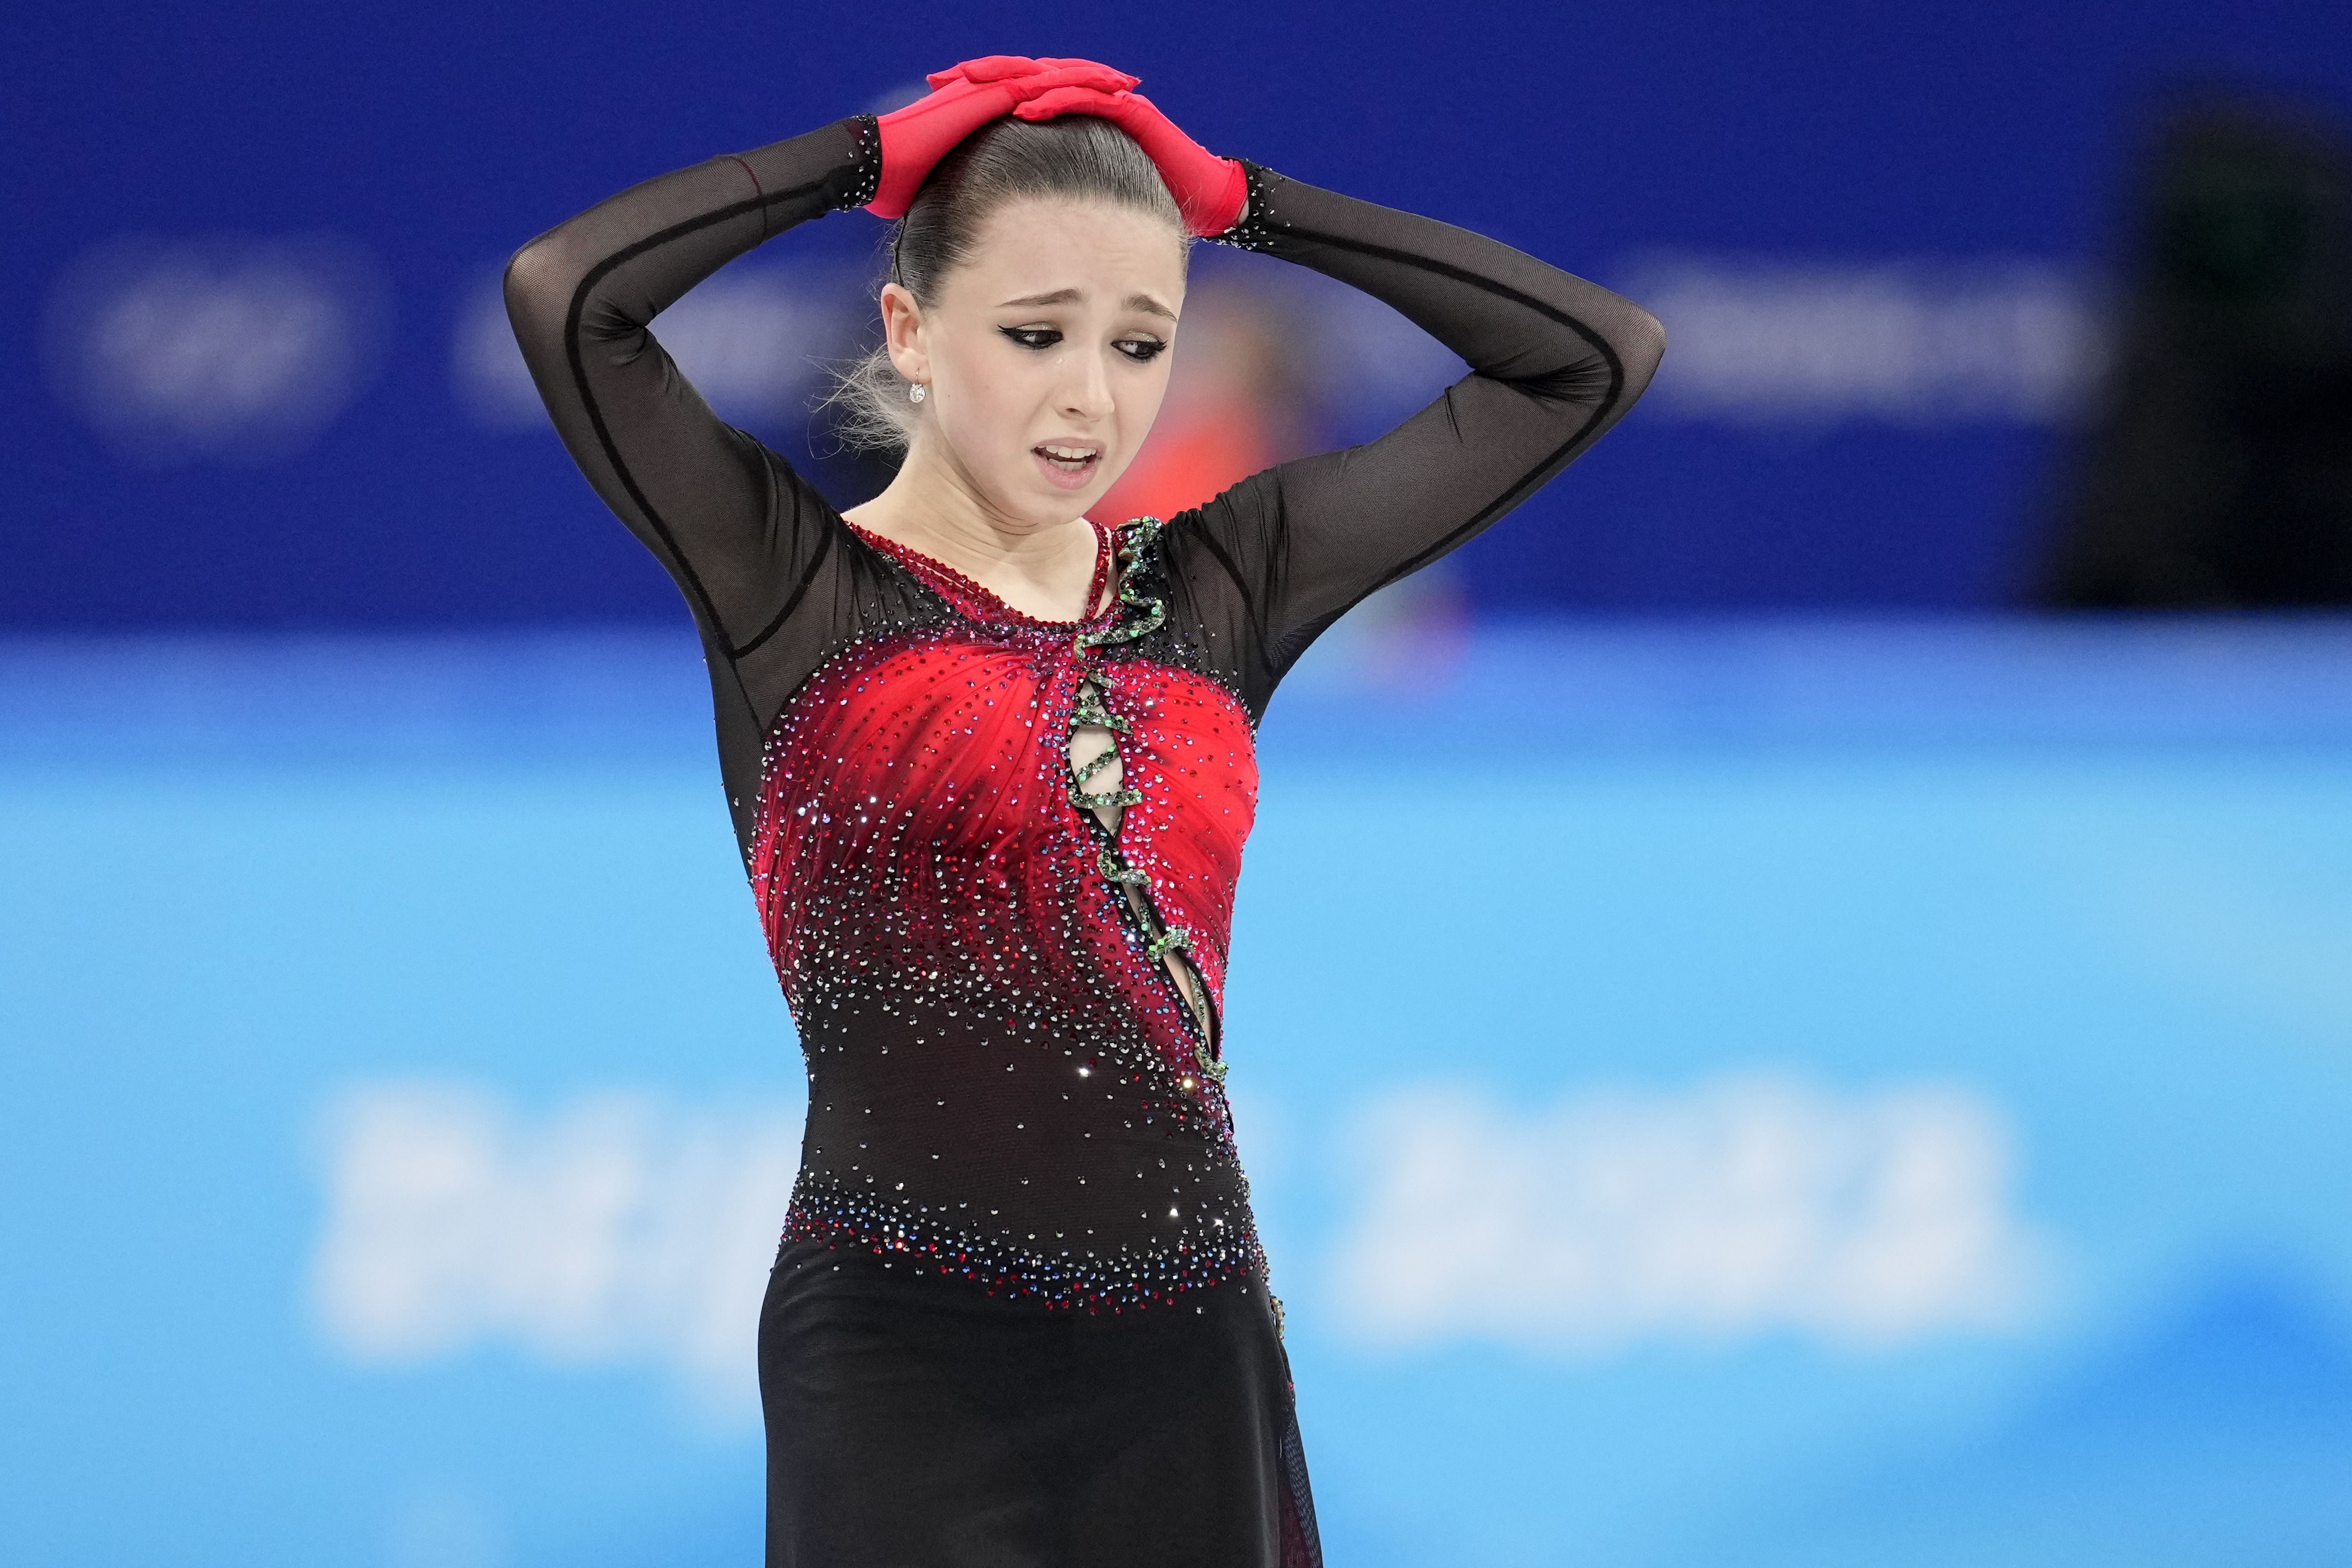 Russian figure skater Valieva at practice after reports of failed drug test